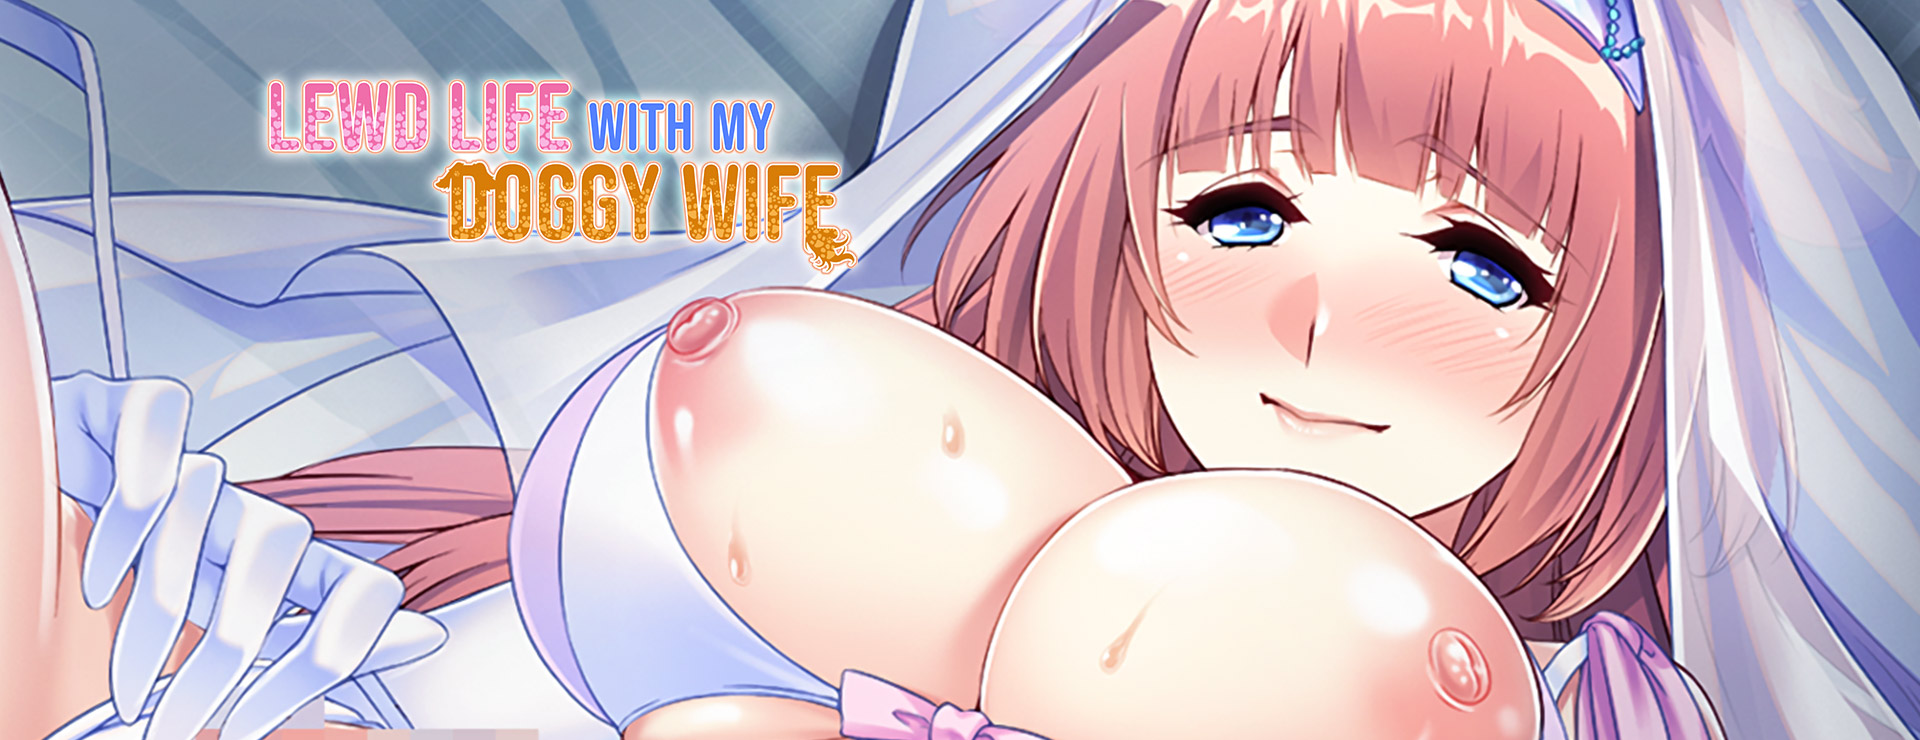 Lewd Life With My Doggy Wife thumbnail